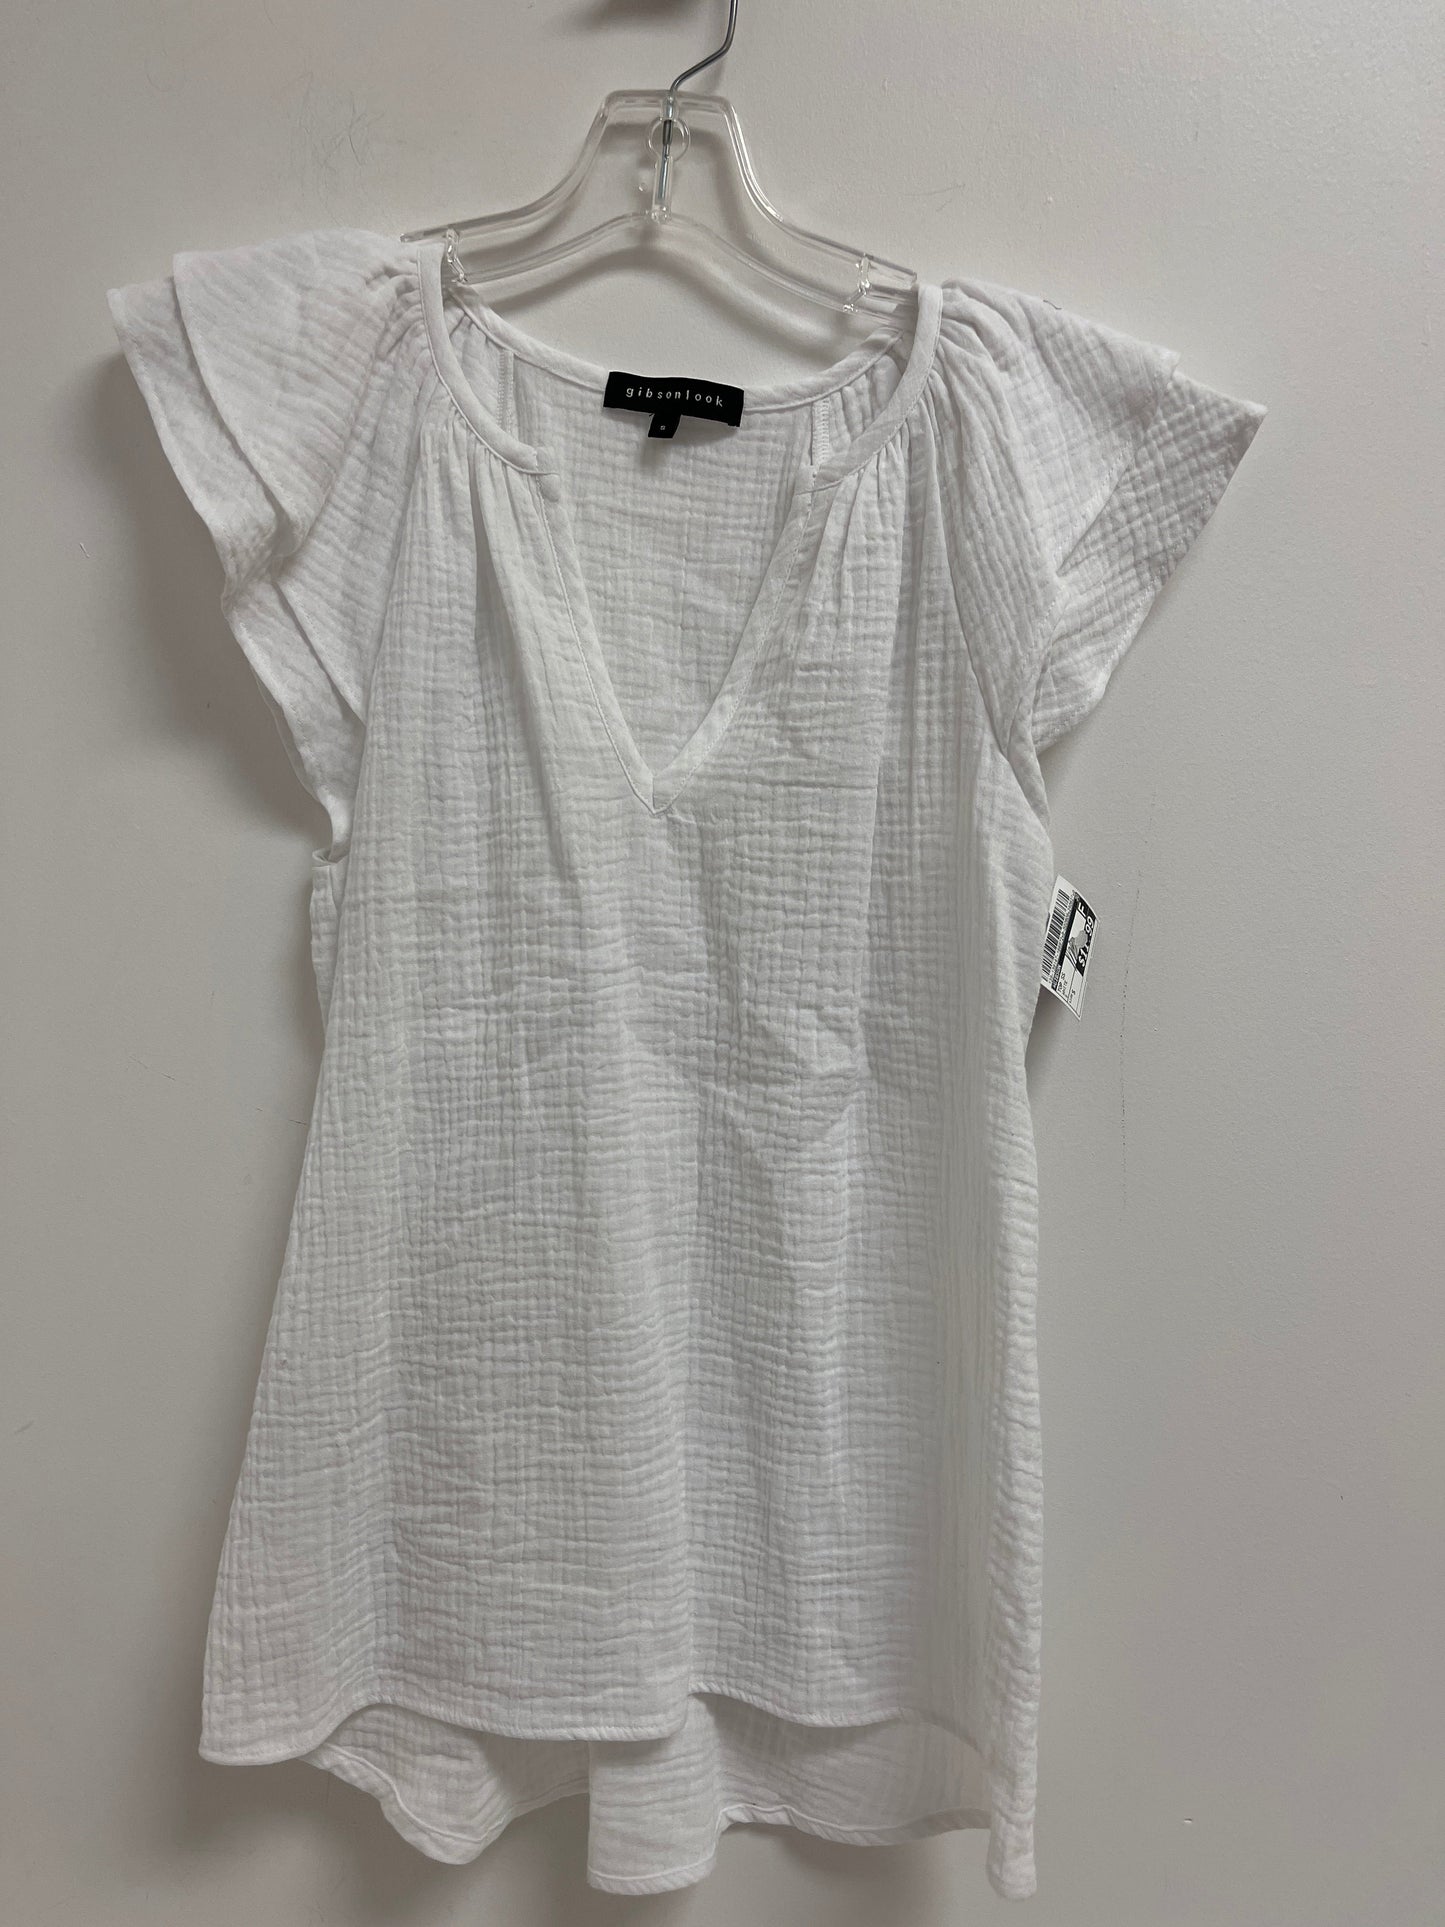 White Top Short Sleeve Gibson, Size S